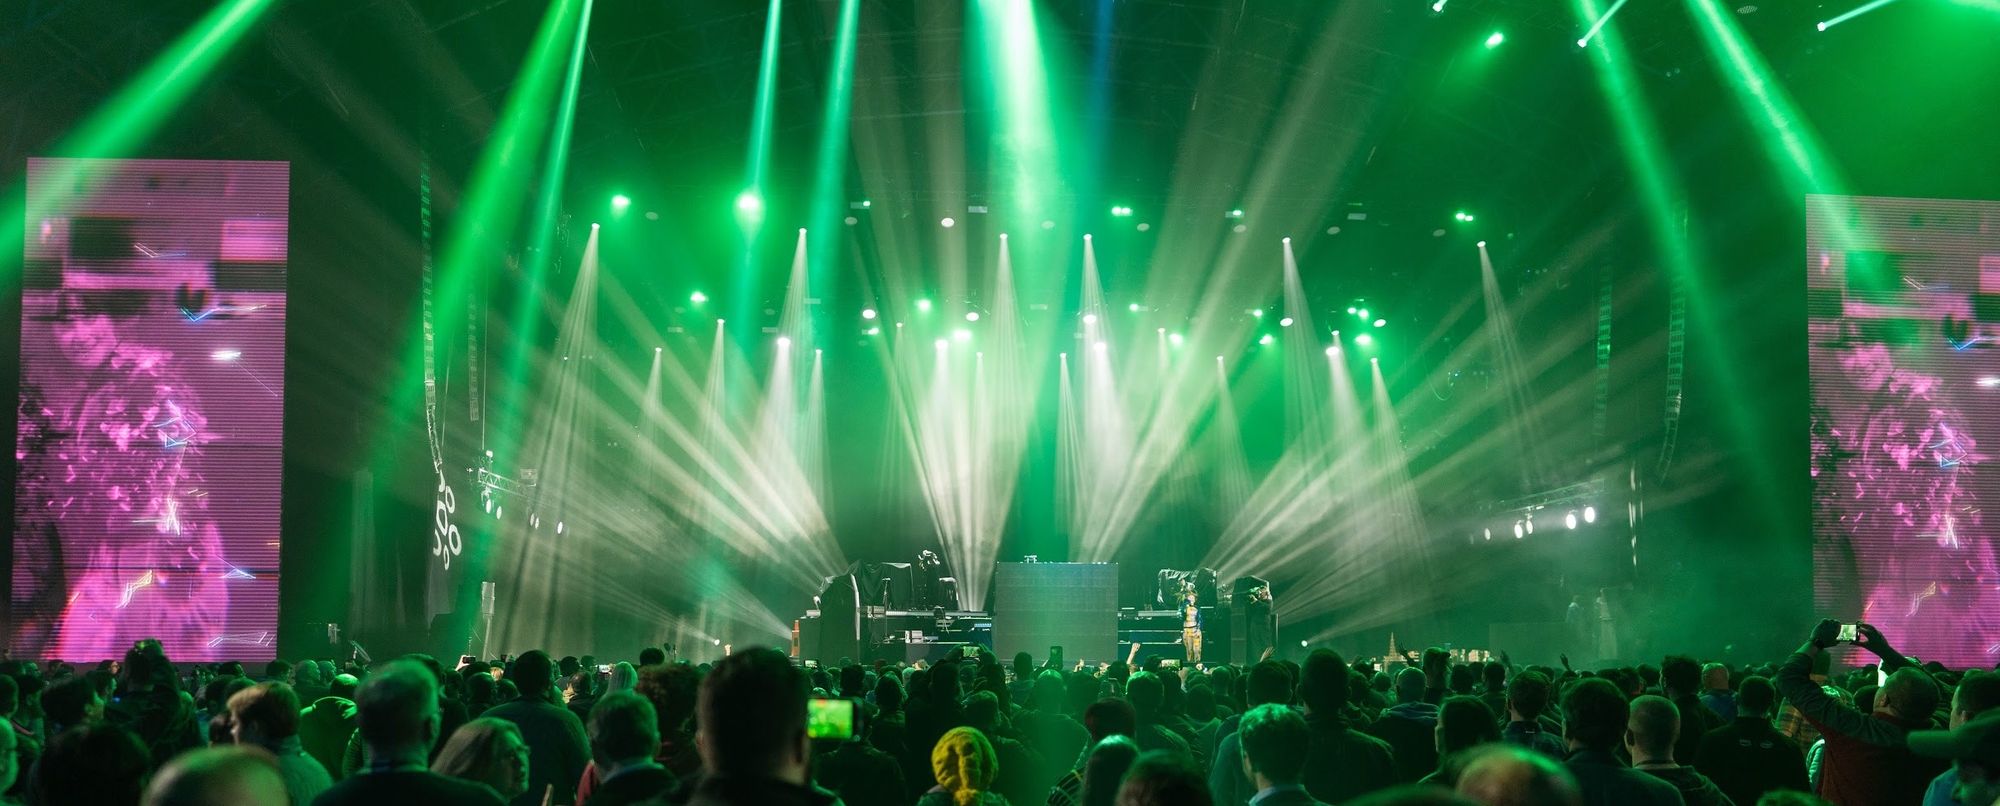 AWS reInvent Party Like a Pro How to get ready for one of the biggest annual tech events